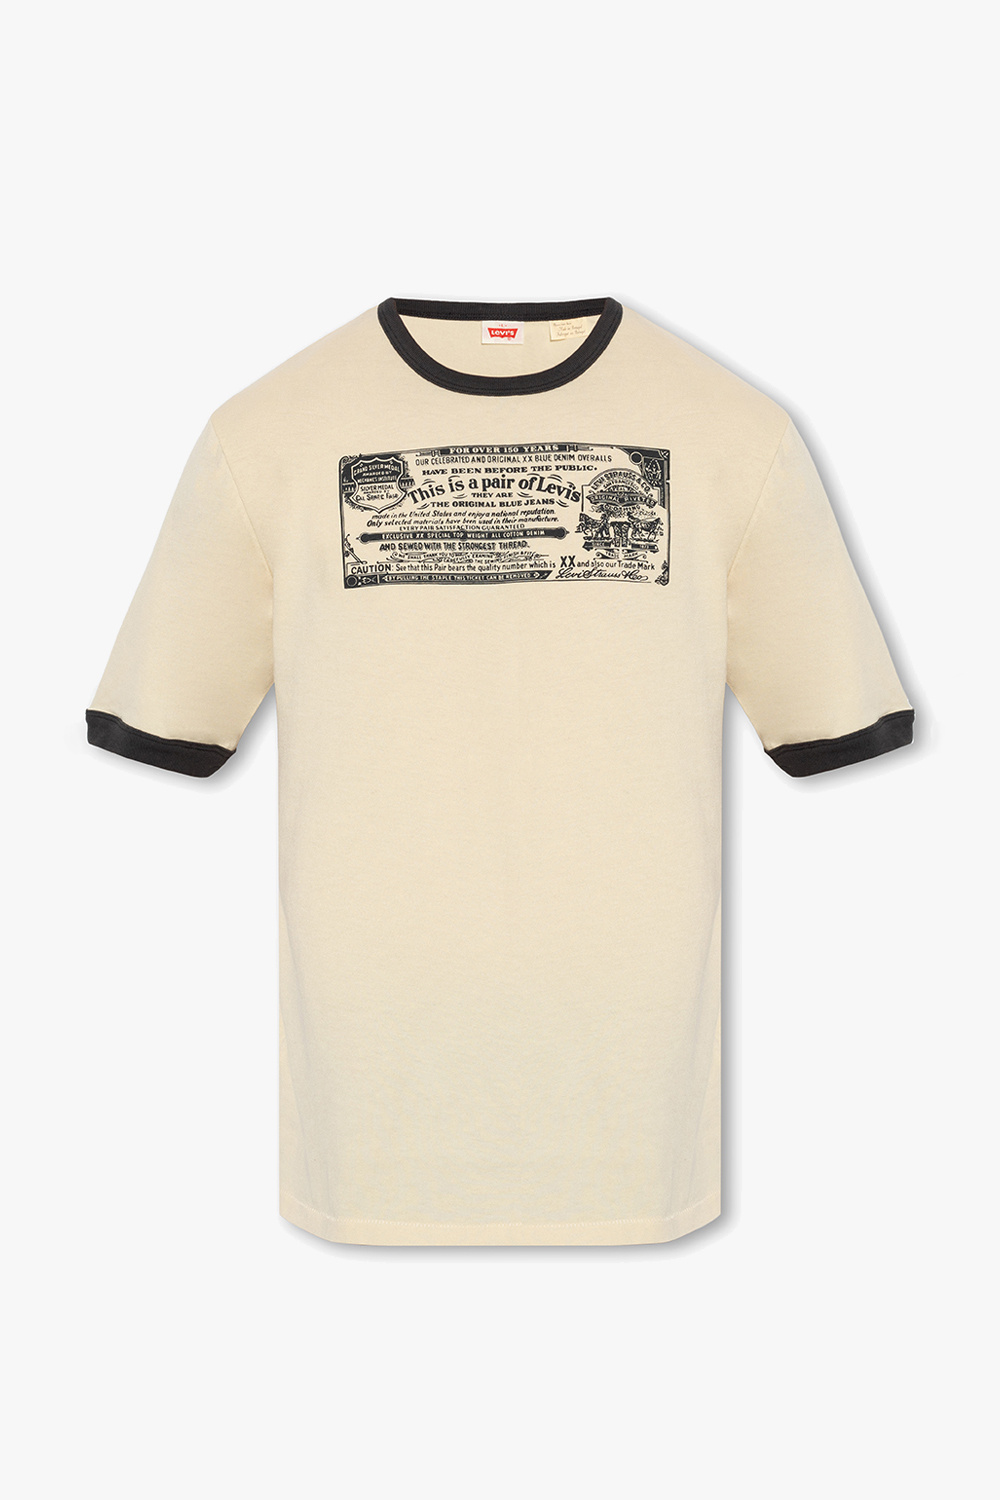 Levi's T-shirt 'Vintage Clothing®' collection